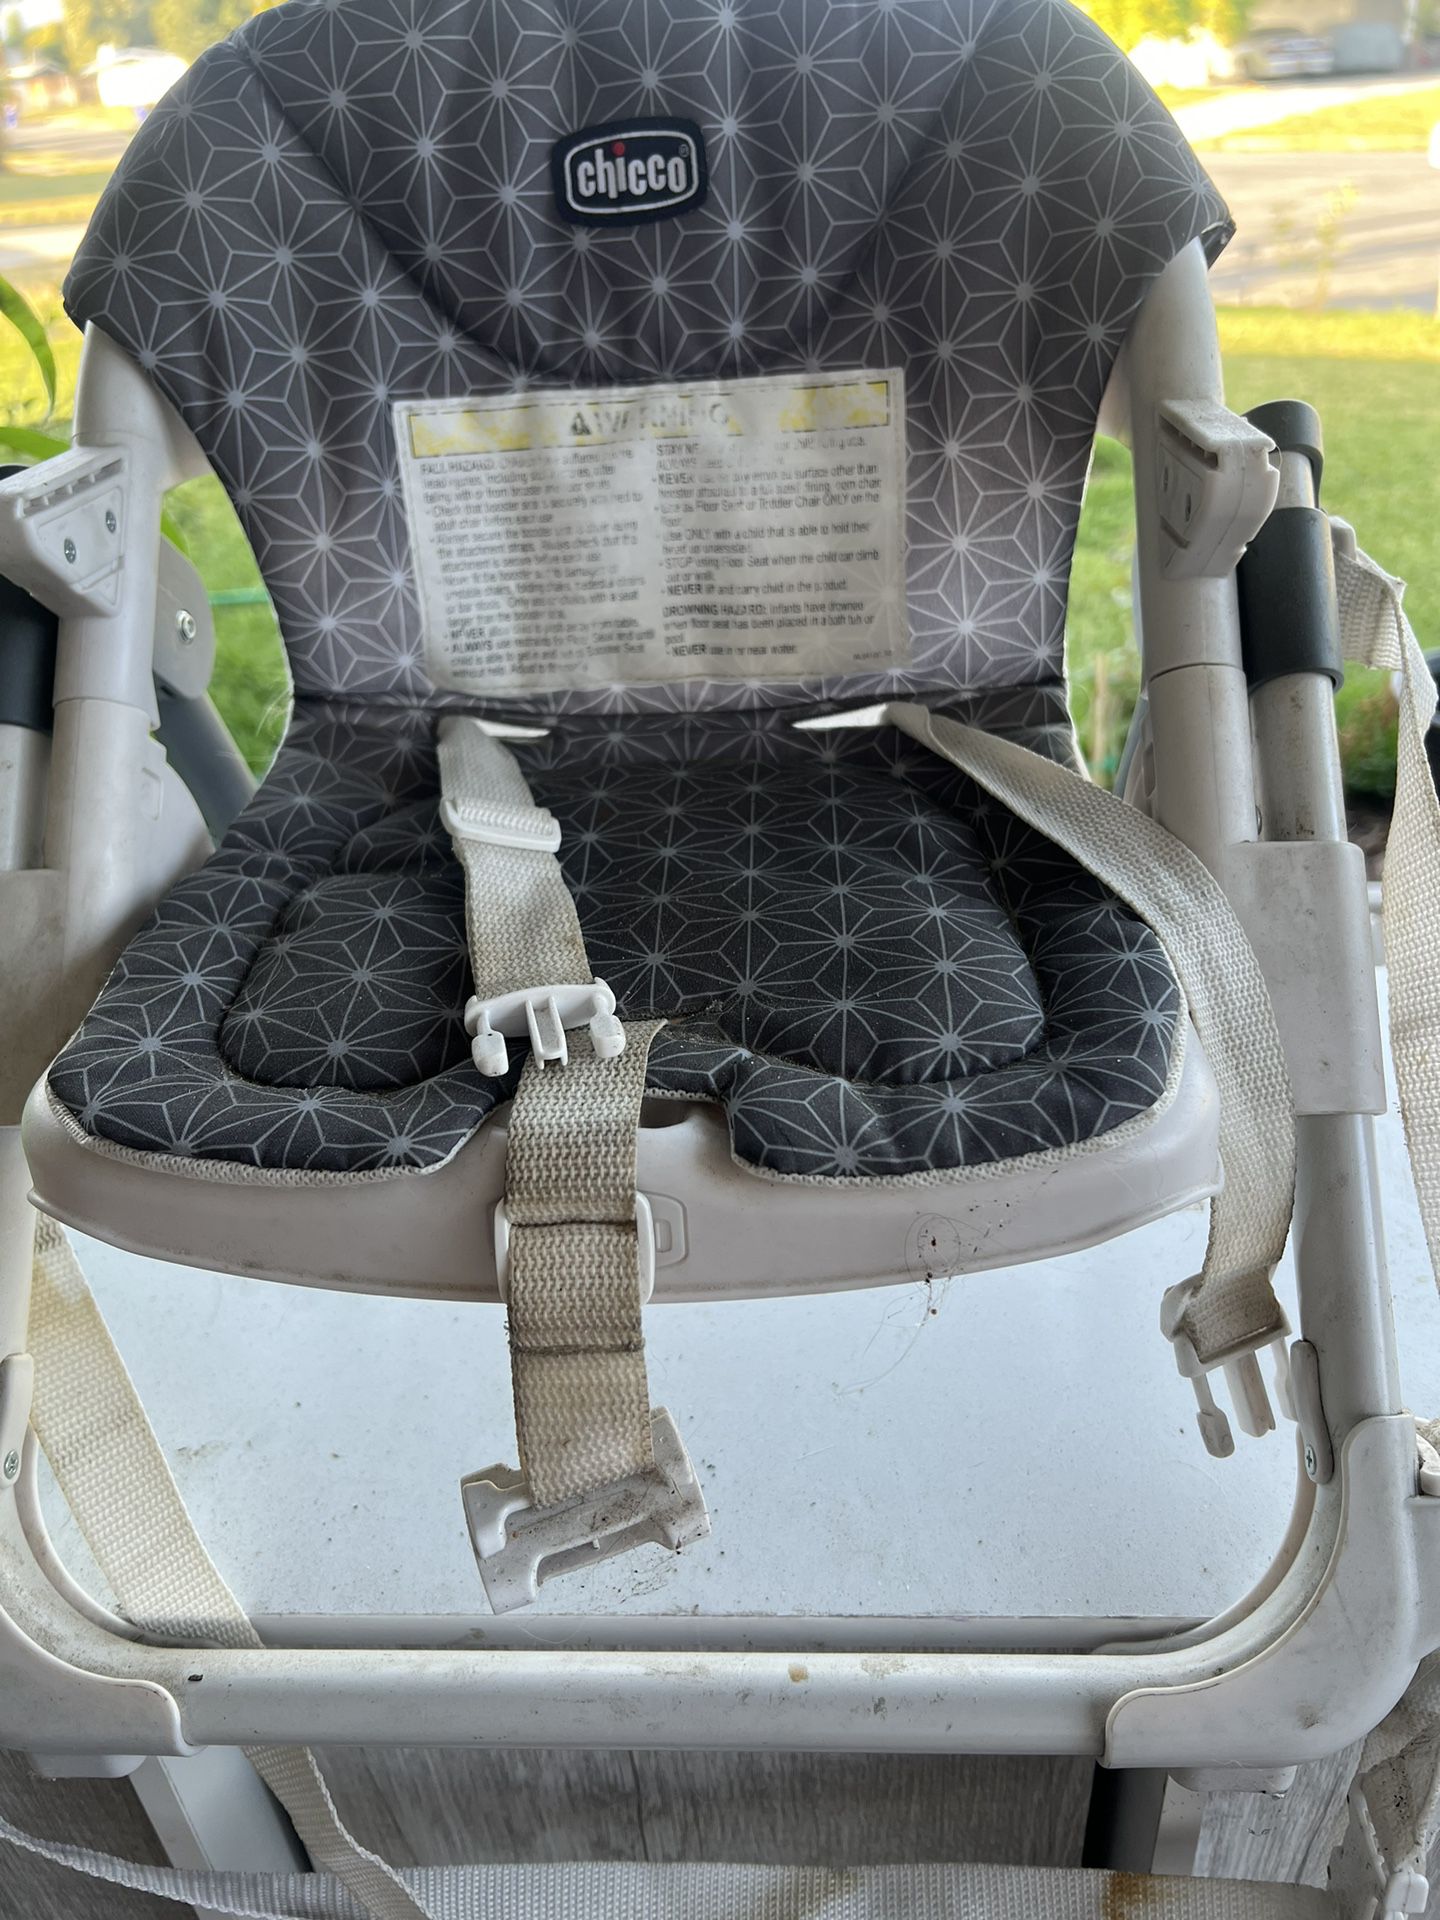 Free Chicco High Chair